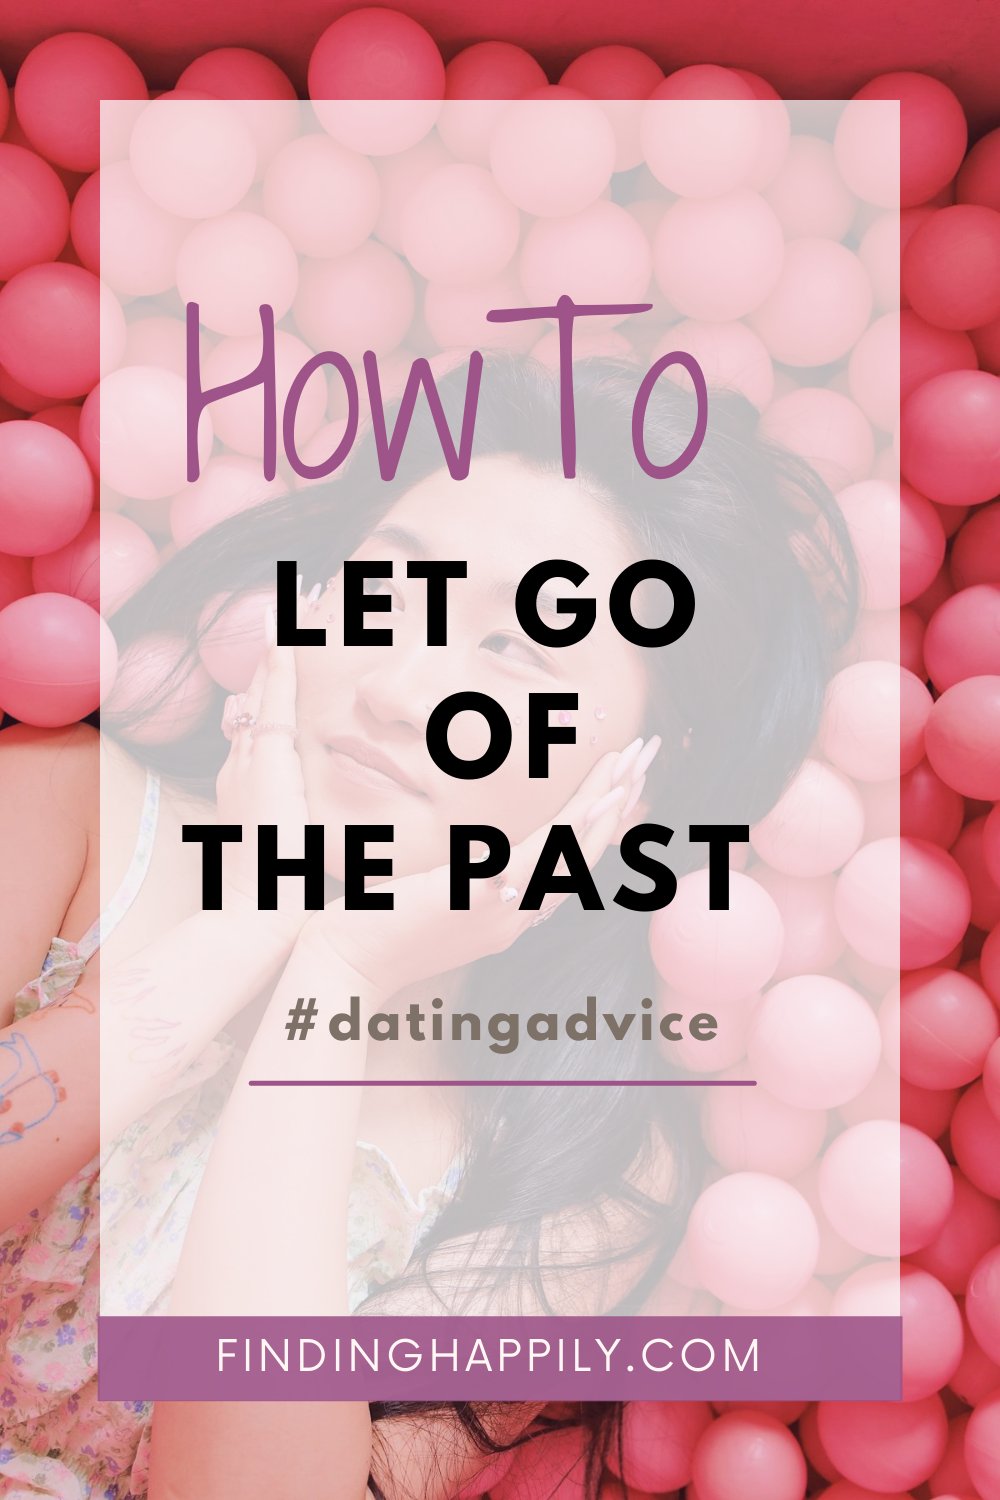 How to let go of past relationships